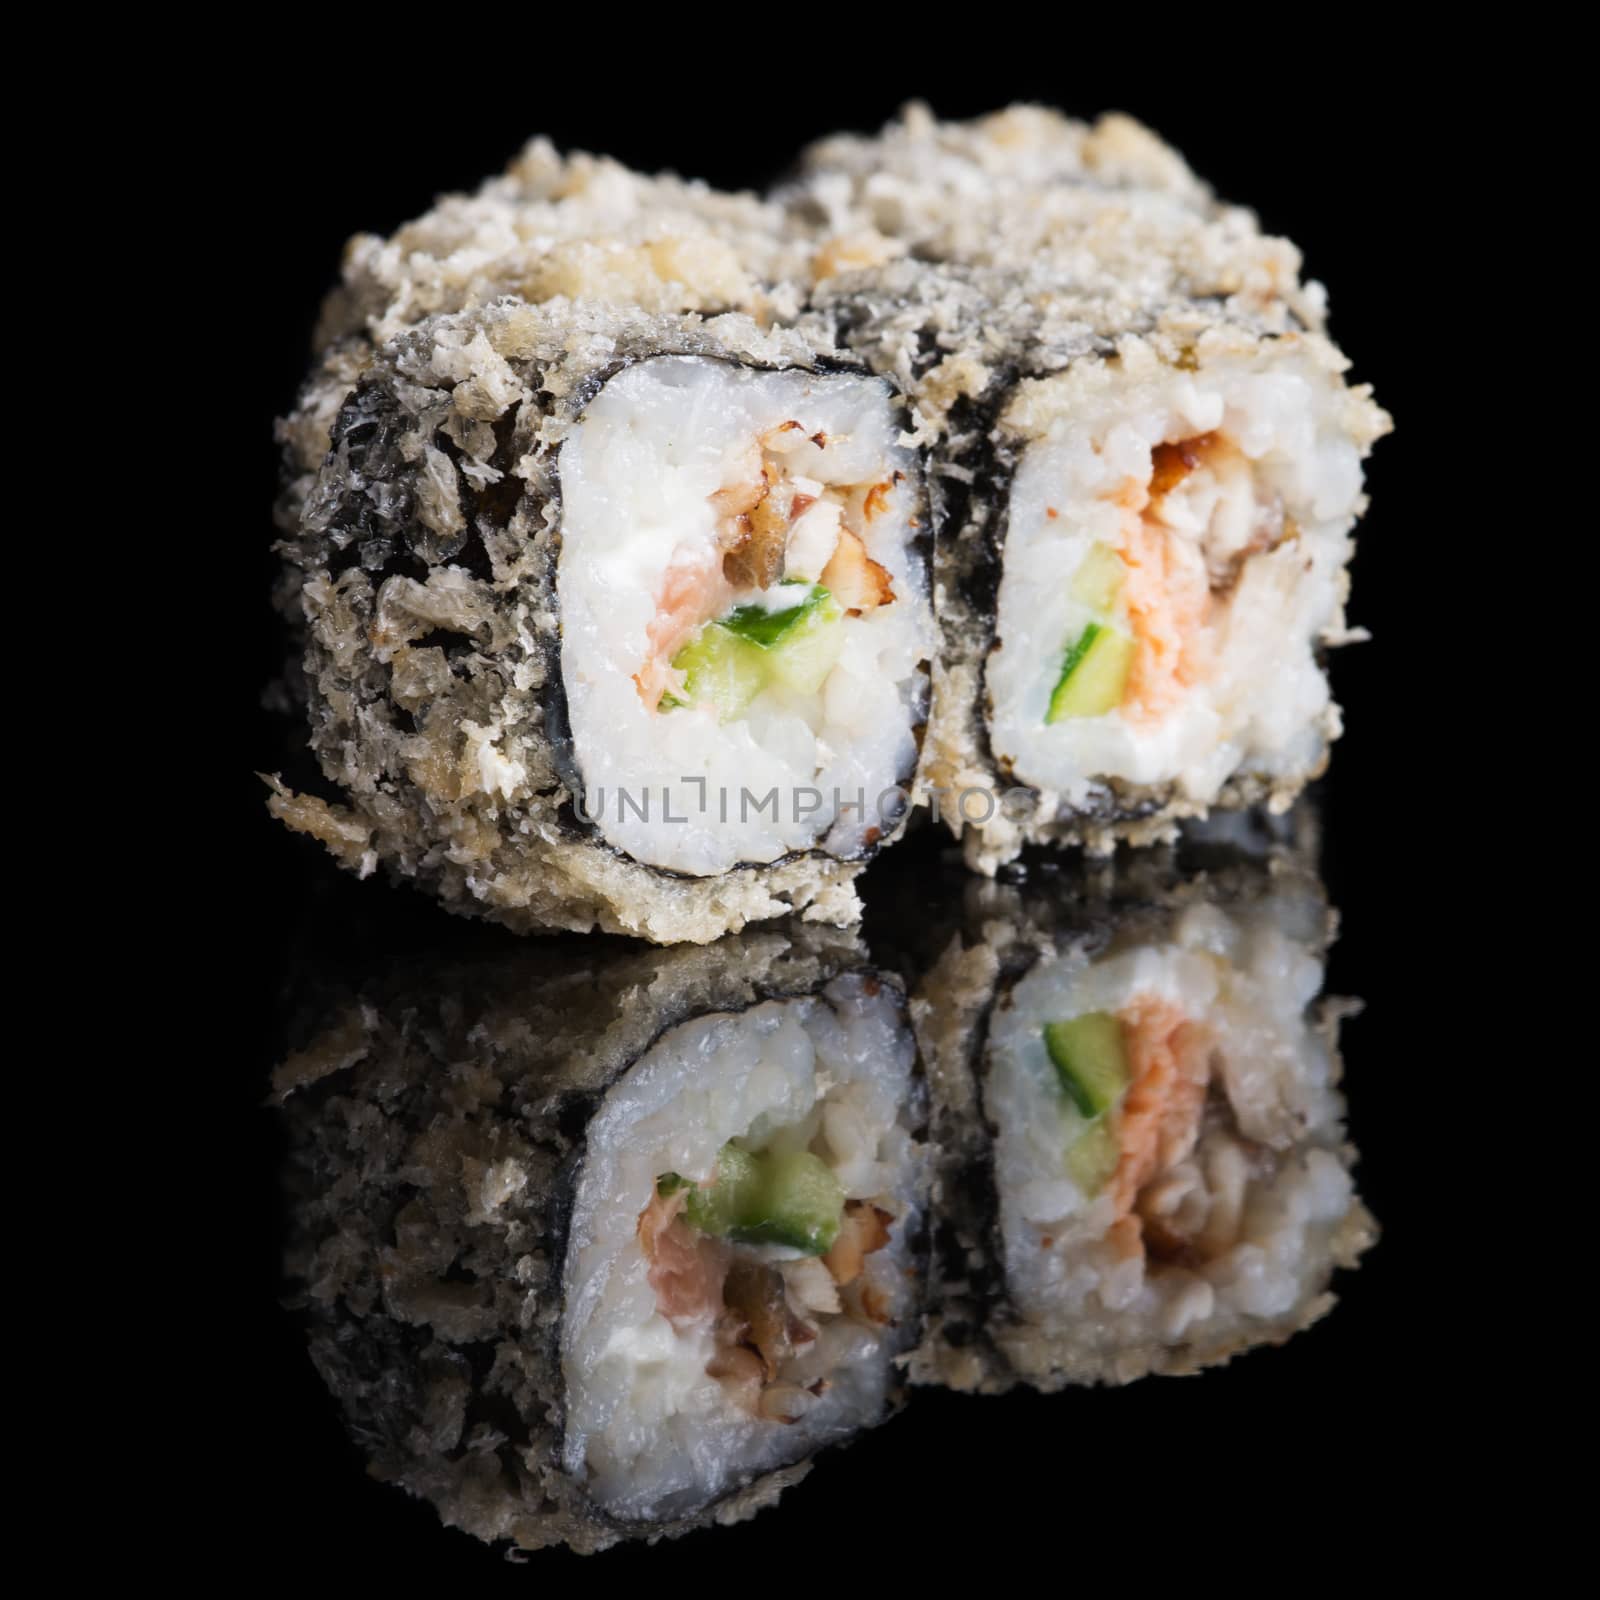 Grilled sushi rolls with salmon and eel by kzen